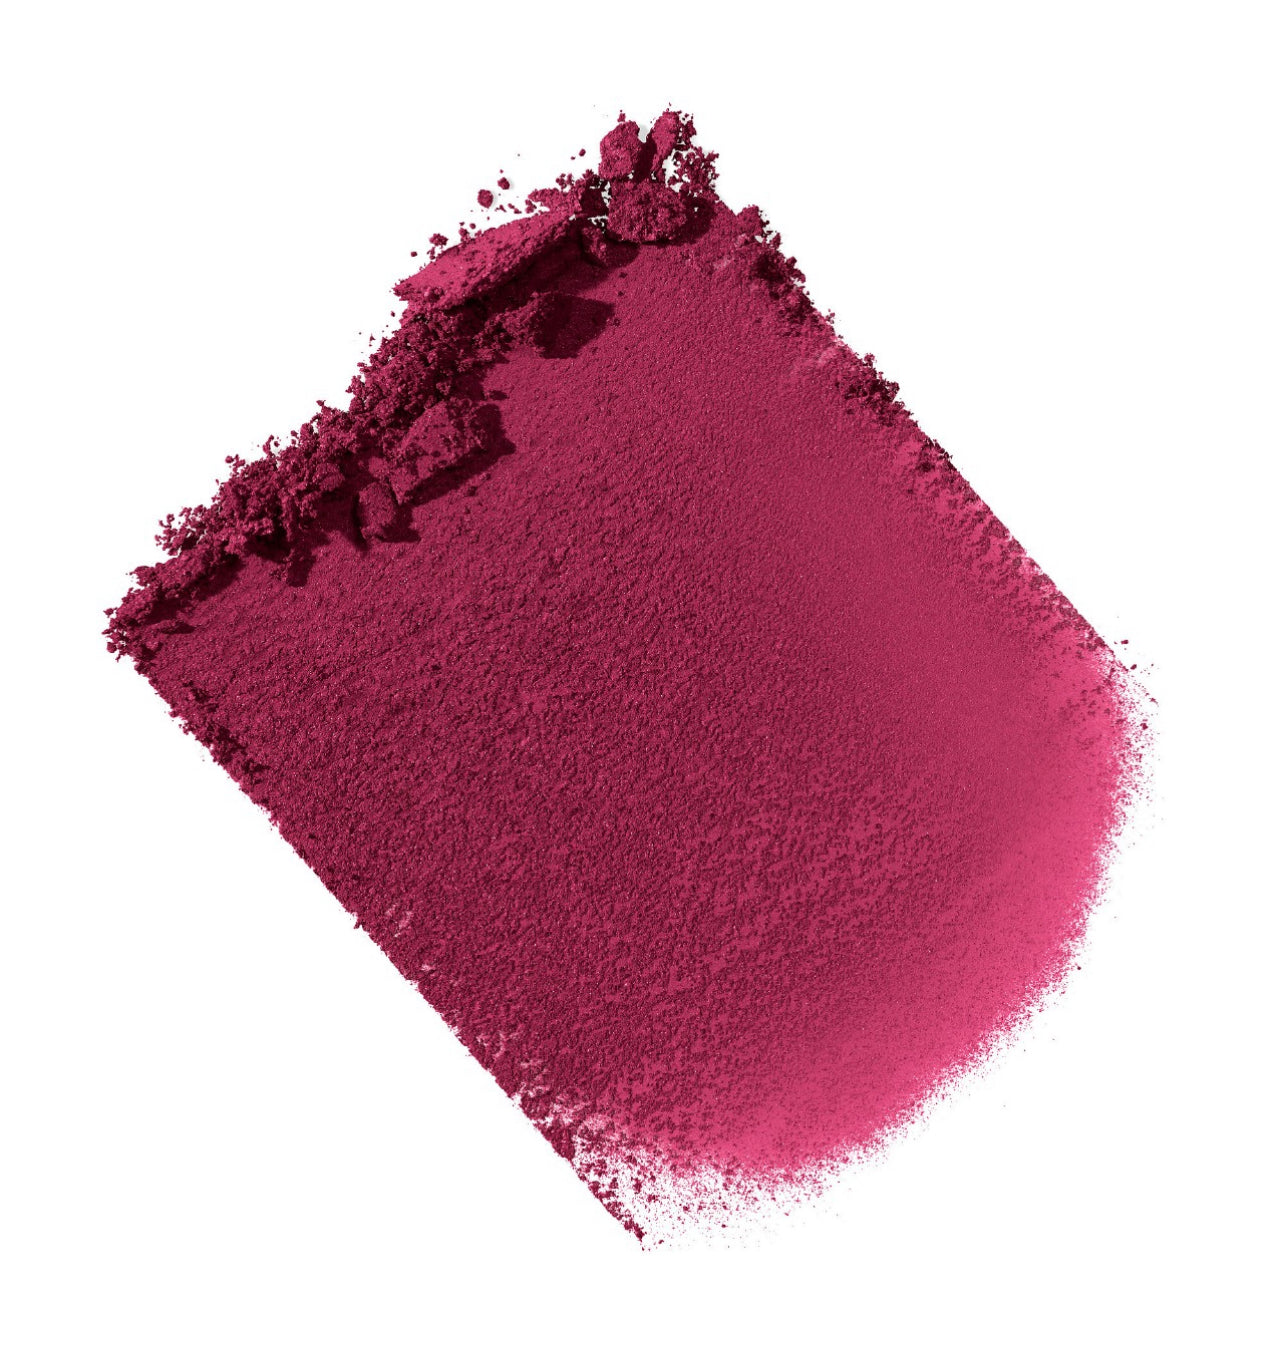 Haus Labs by Lady Gaga, Color Fuse Talc-Free Powder Blush with Fermented Arnica